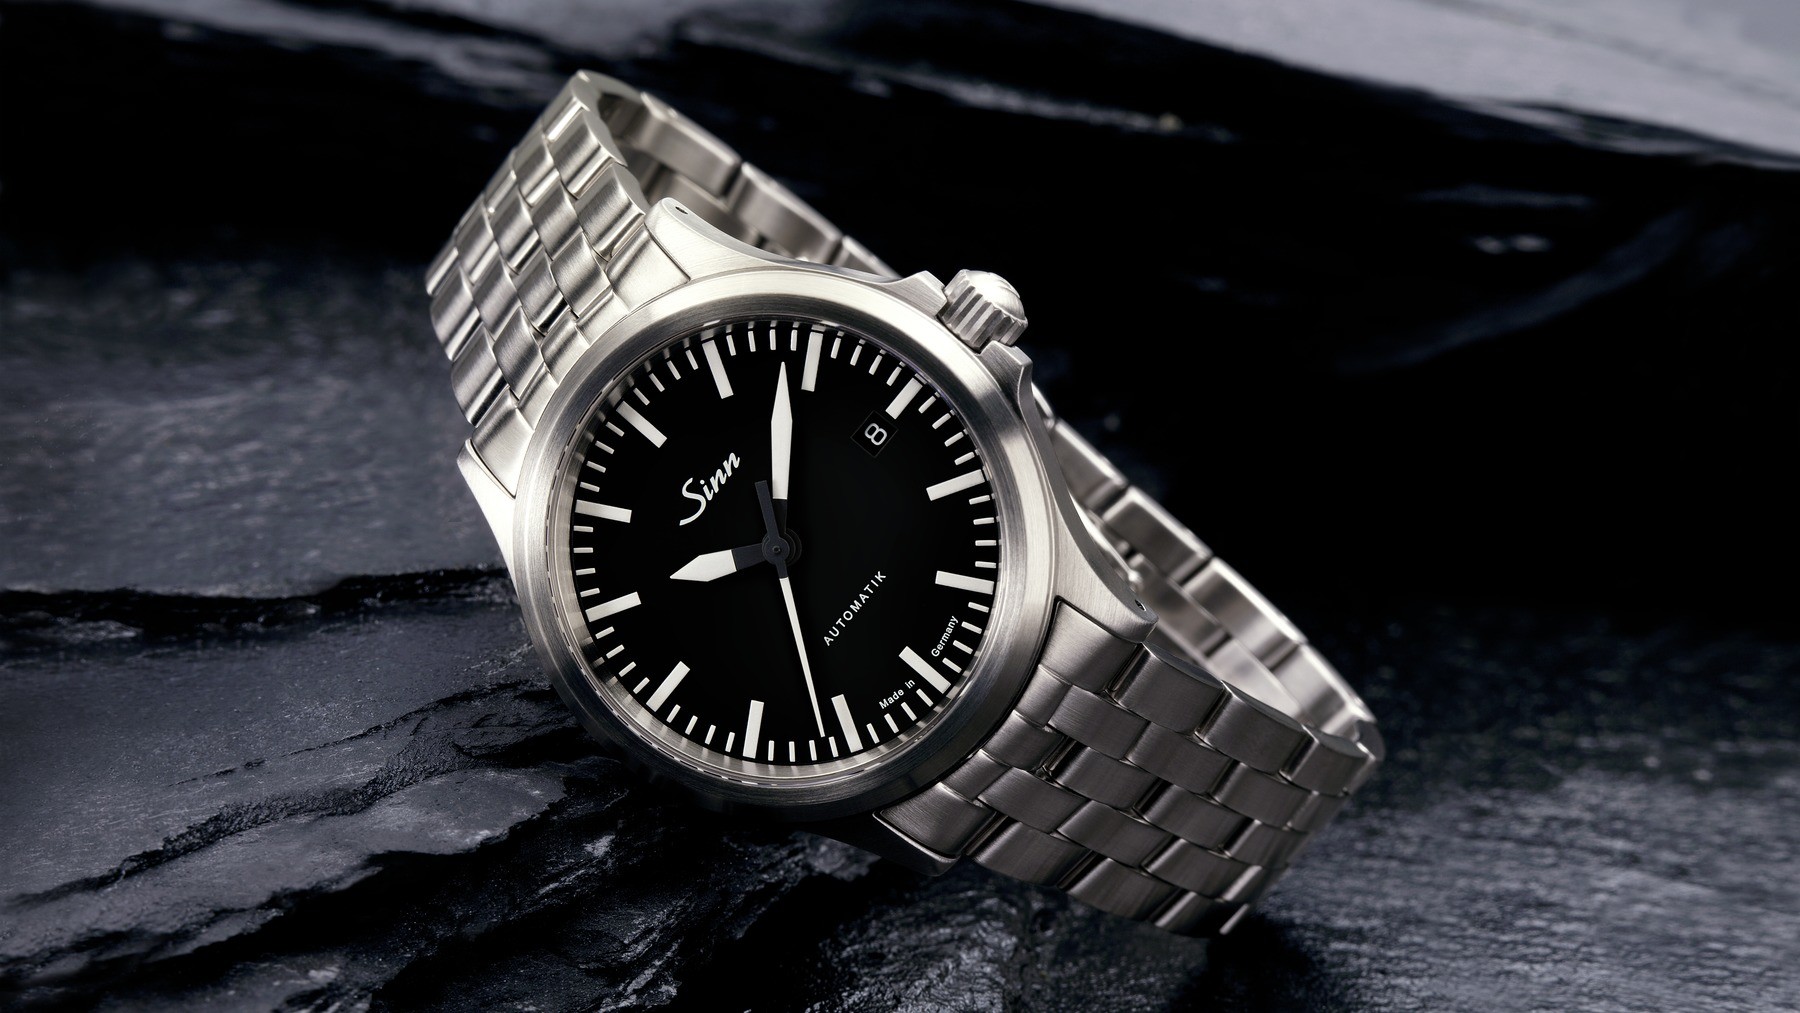 Sinn 104 A St Sa Full Review  The Truth About Watches